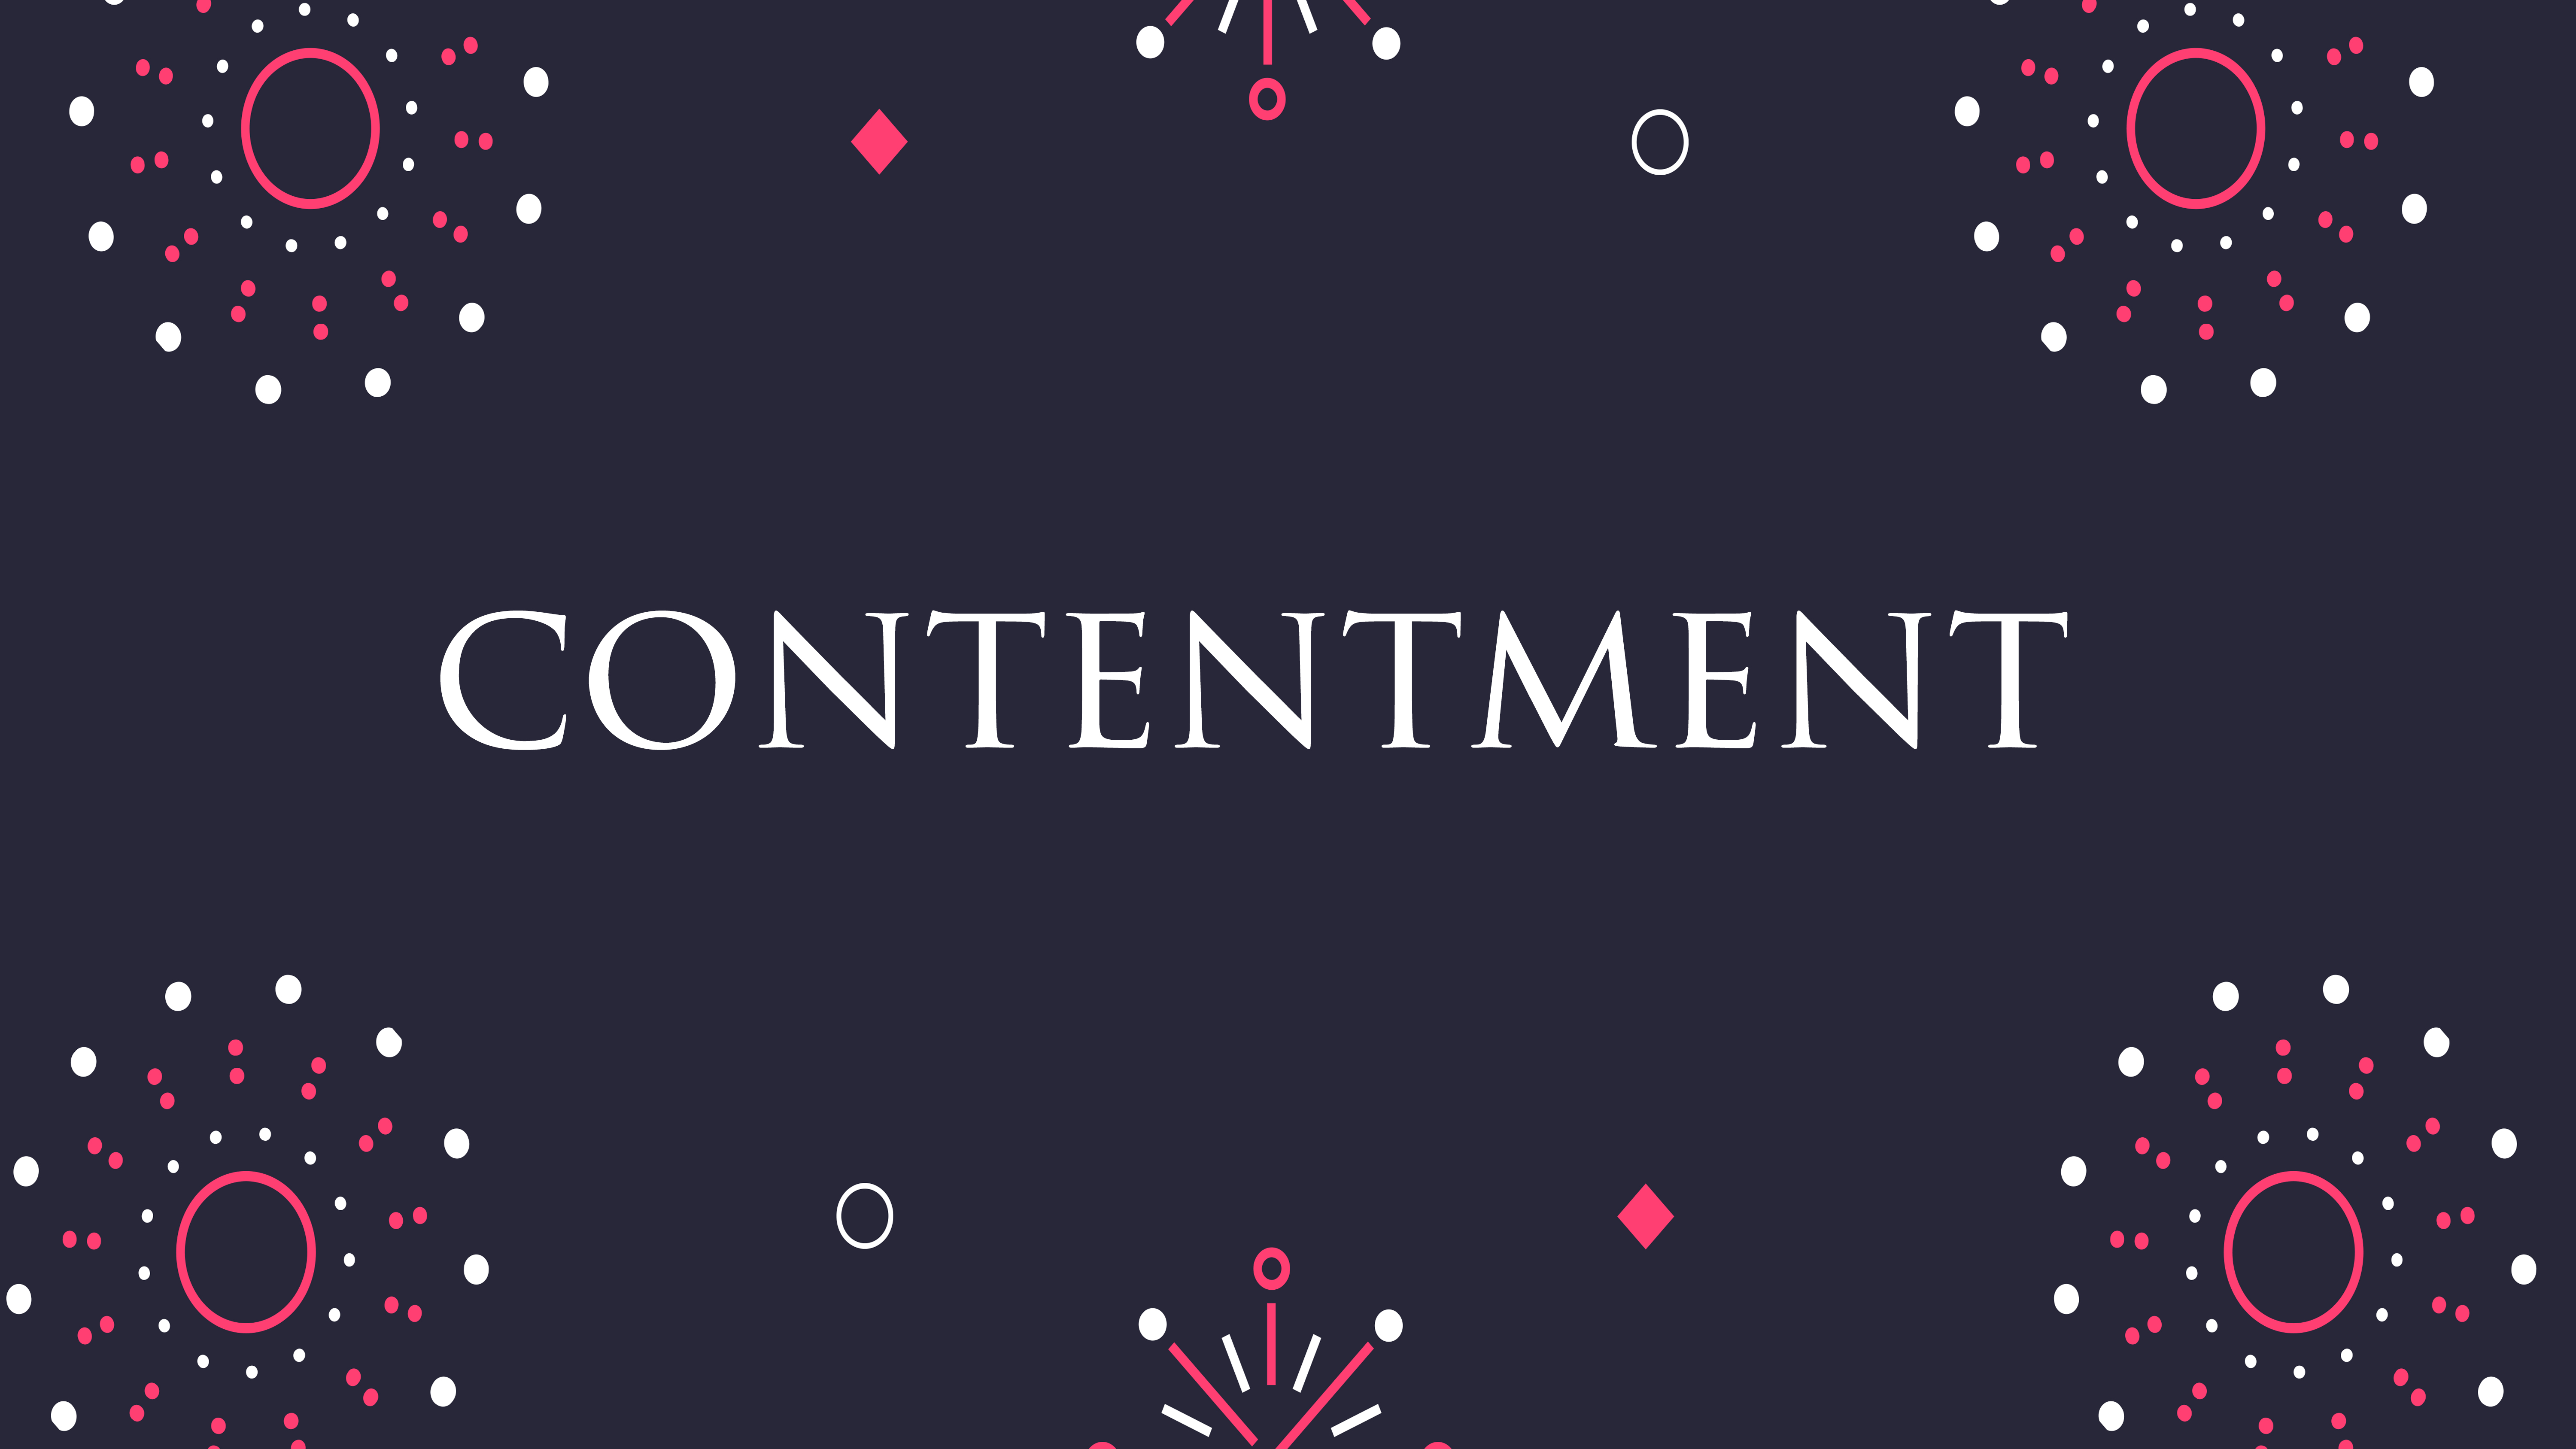 The Key to Contentment